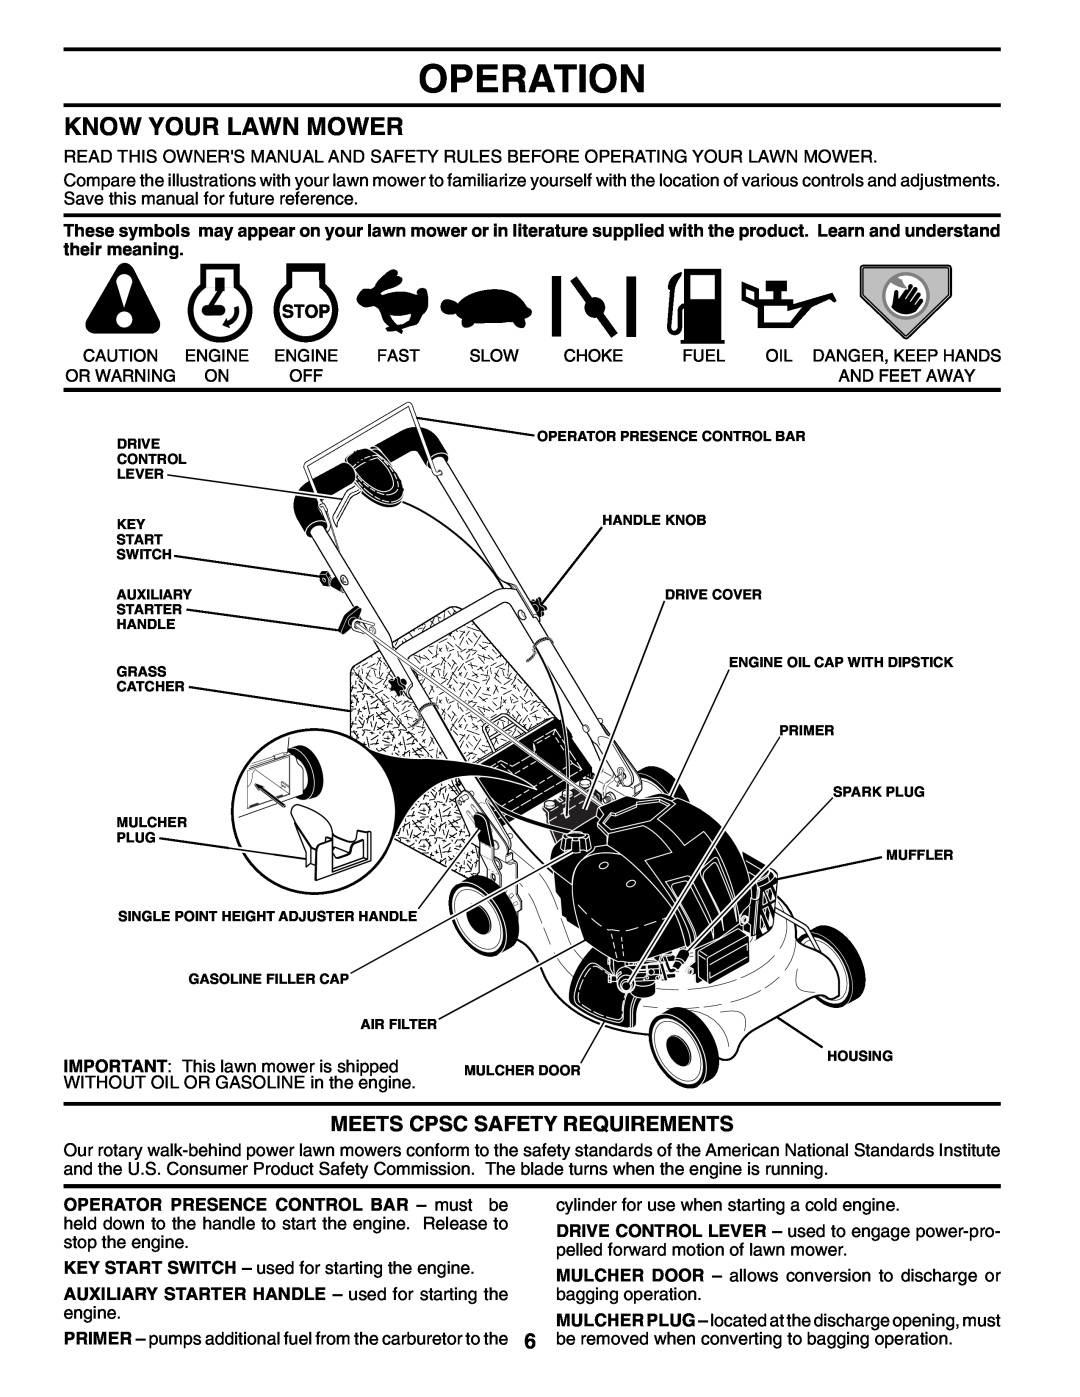 Husqvarna 87521RES owner manual Operation, Know Your Lawn Mower, Meets Cpsc Safety Requirements 